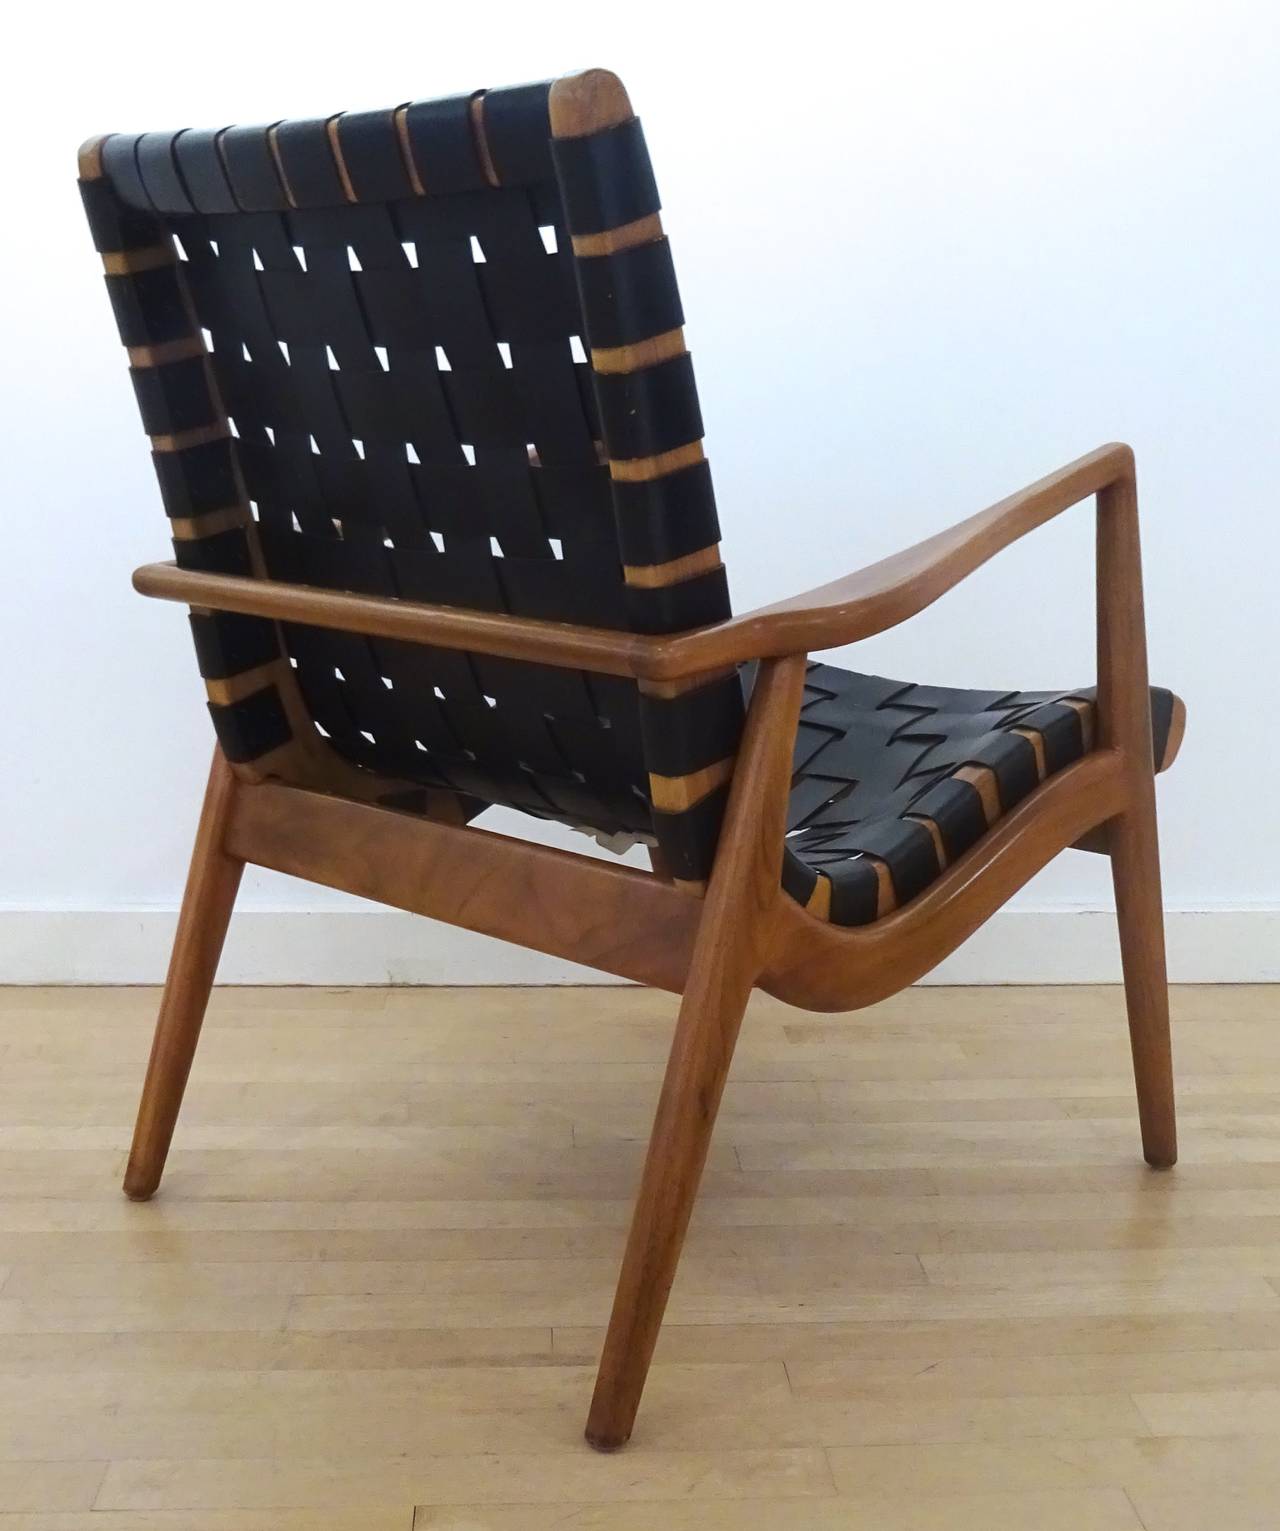 Sculptural Pair of 1950s Mel Smilow Walnut and Leather Lounge Chairs For Sale 2